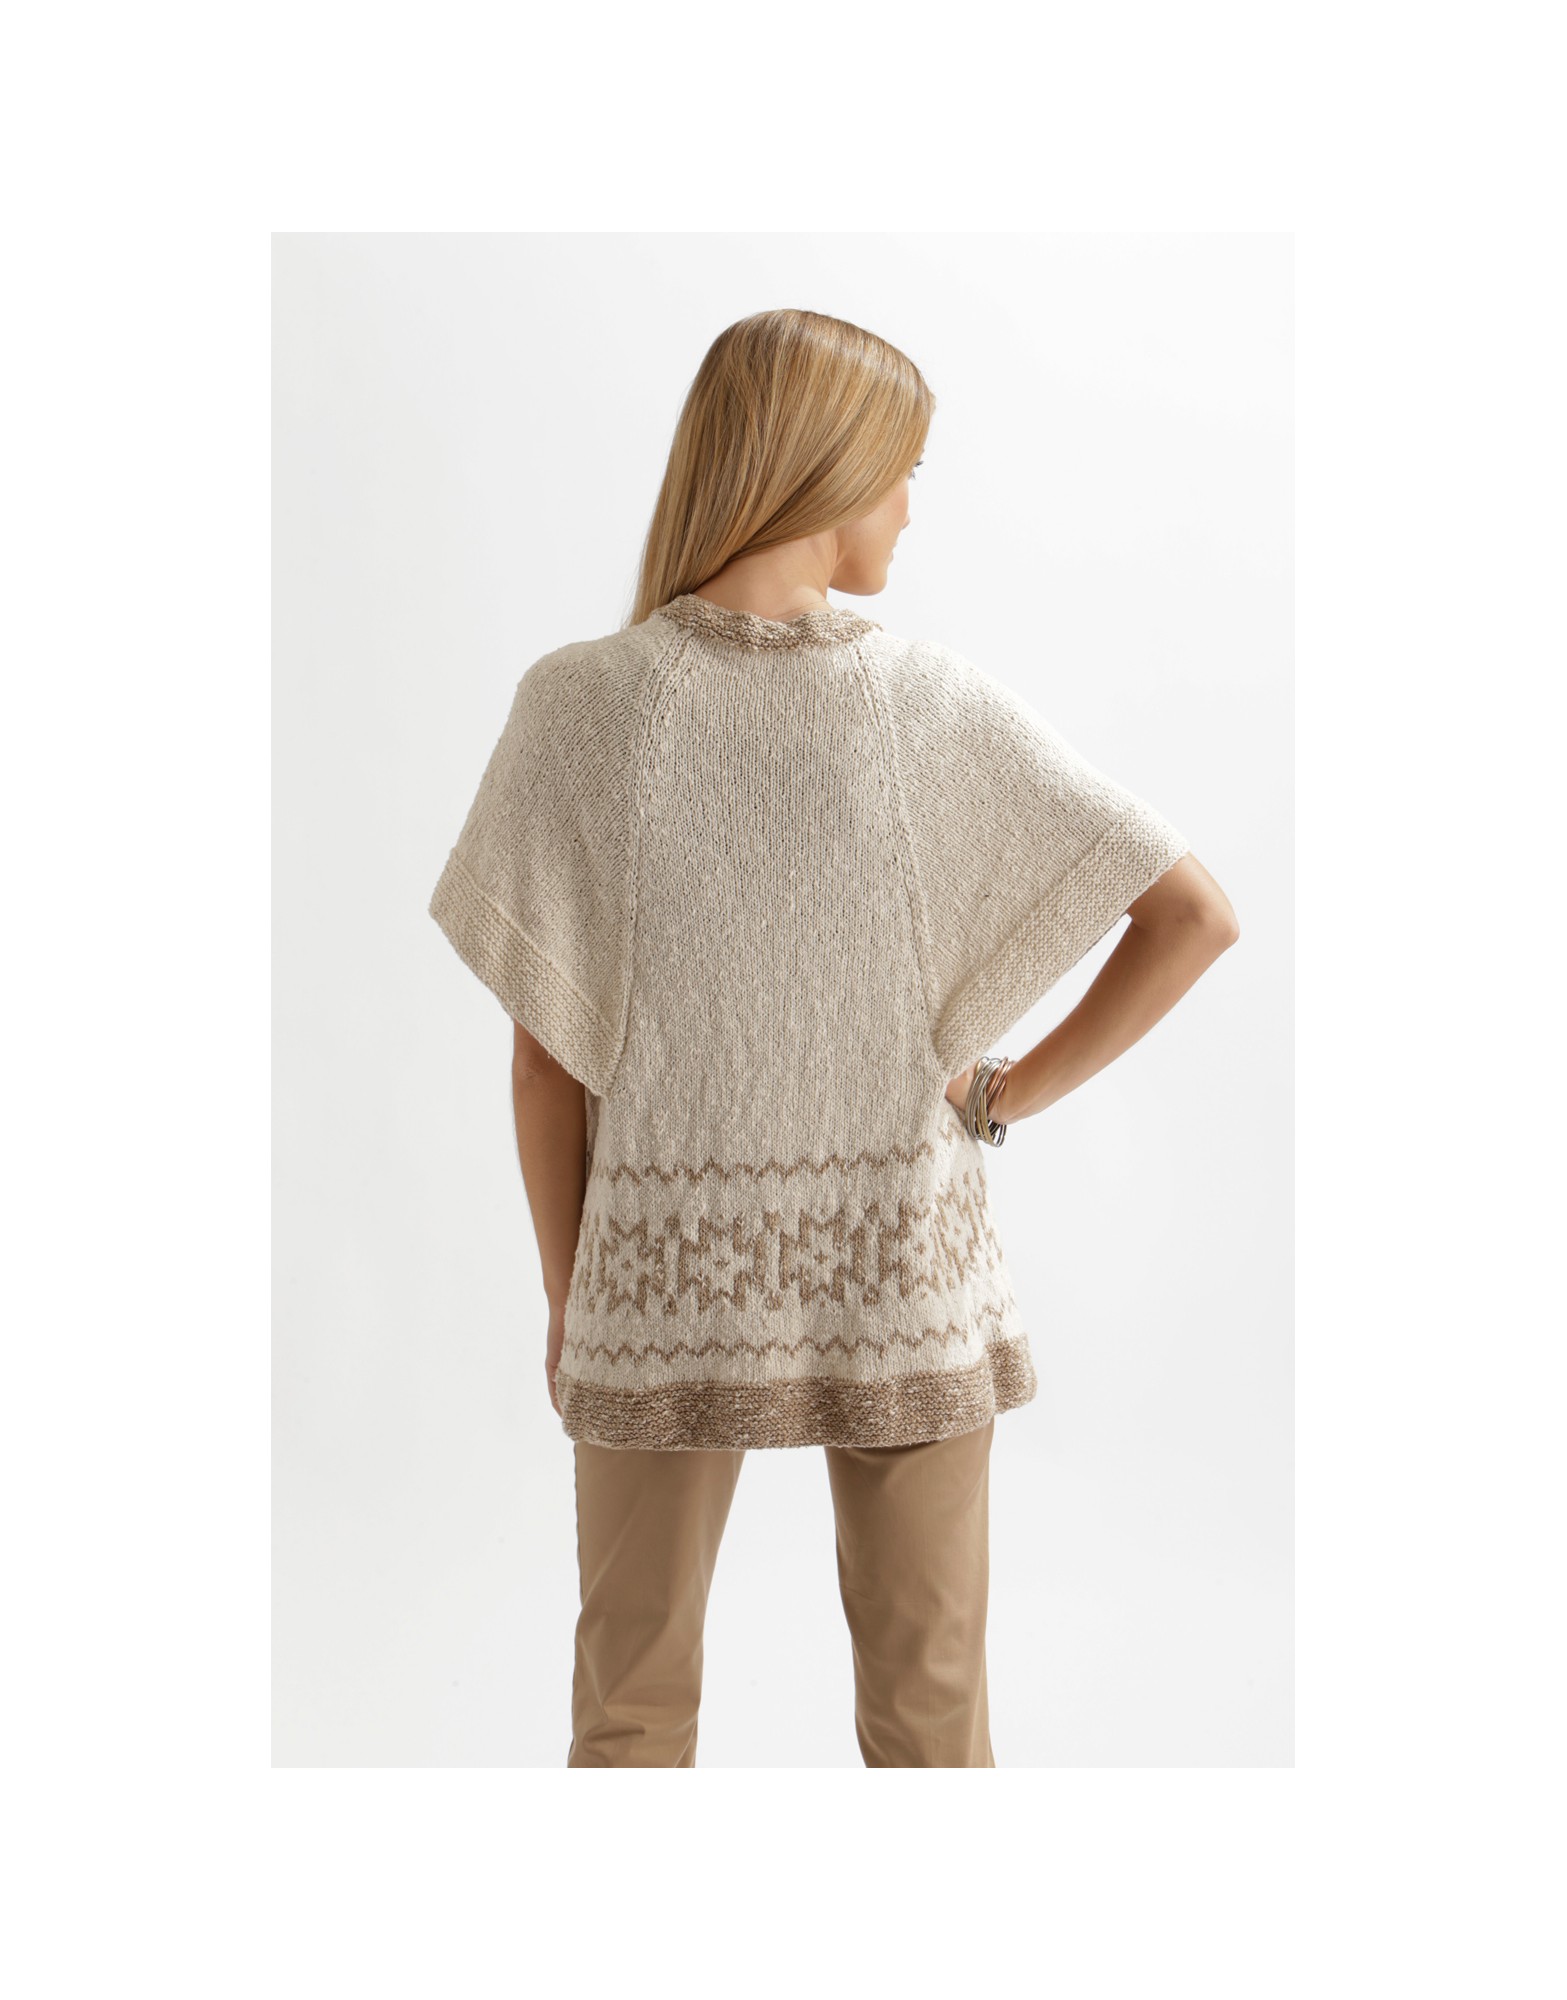 Over Sized Cardigan with Short Sleeves Free Knitting Pattern